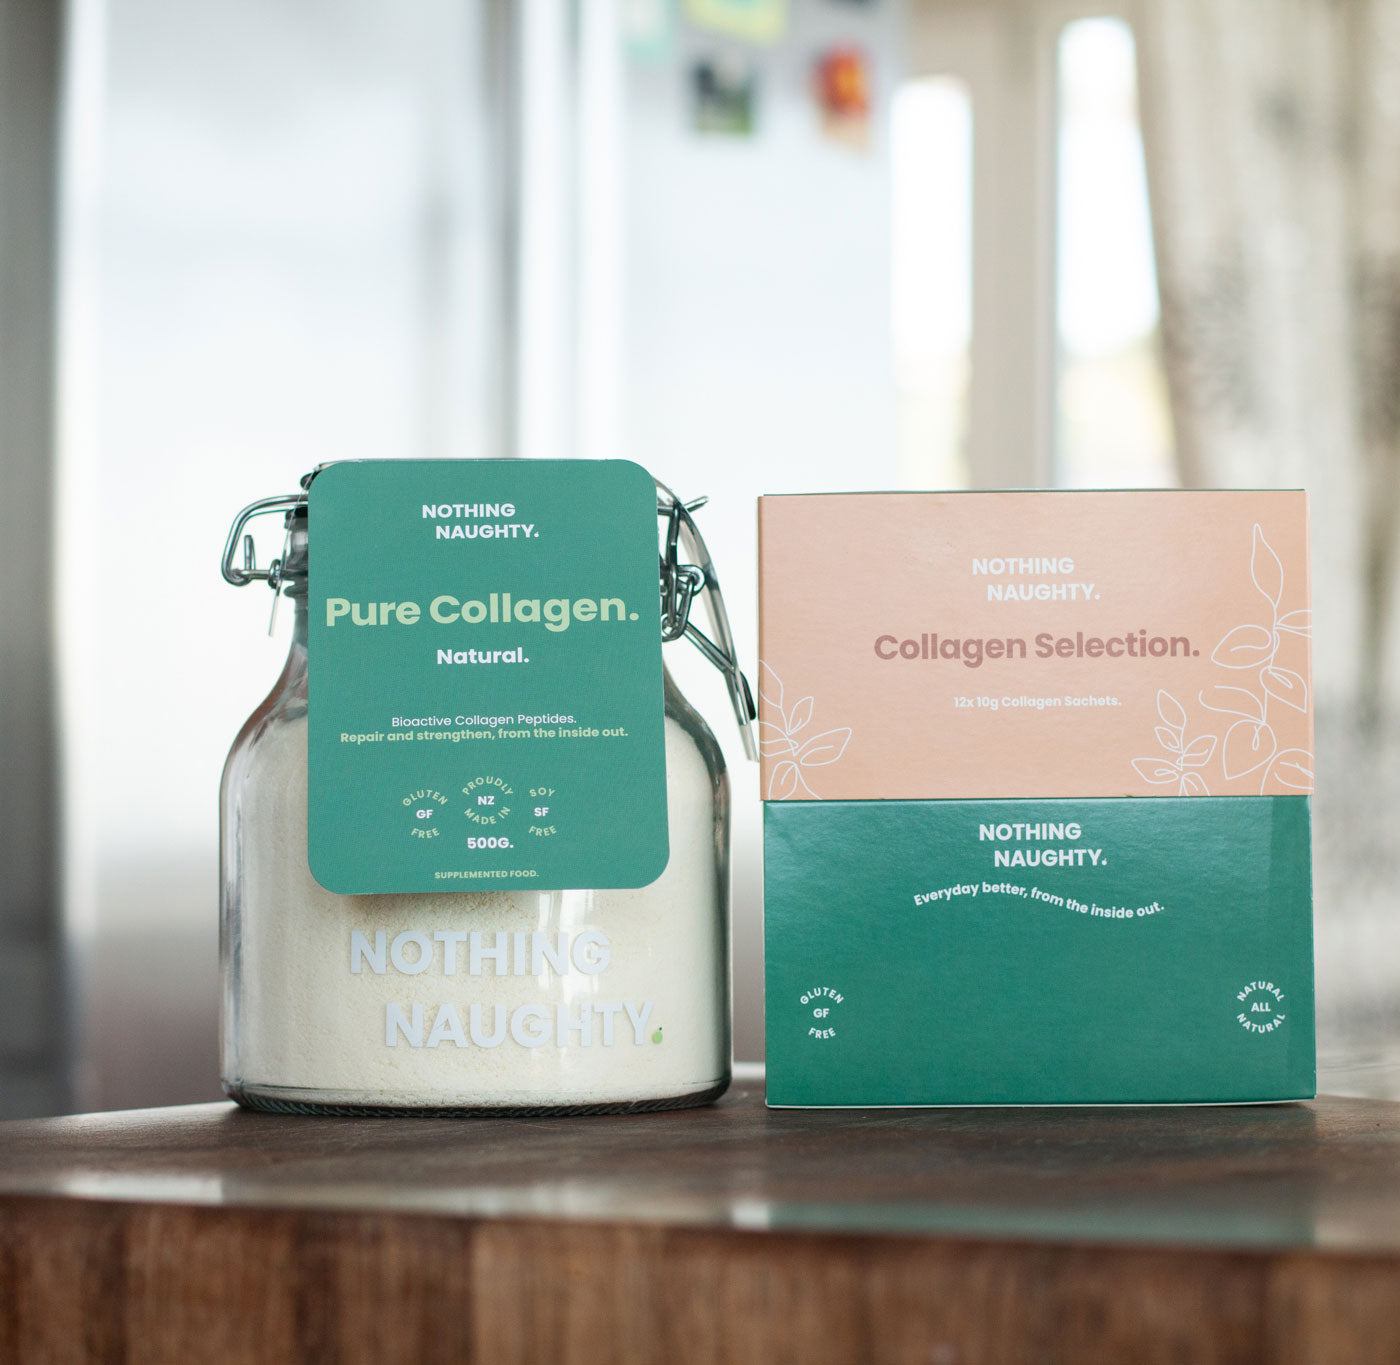 Collagen You Can Trust